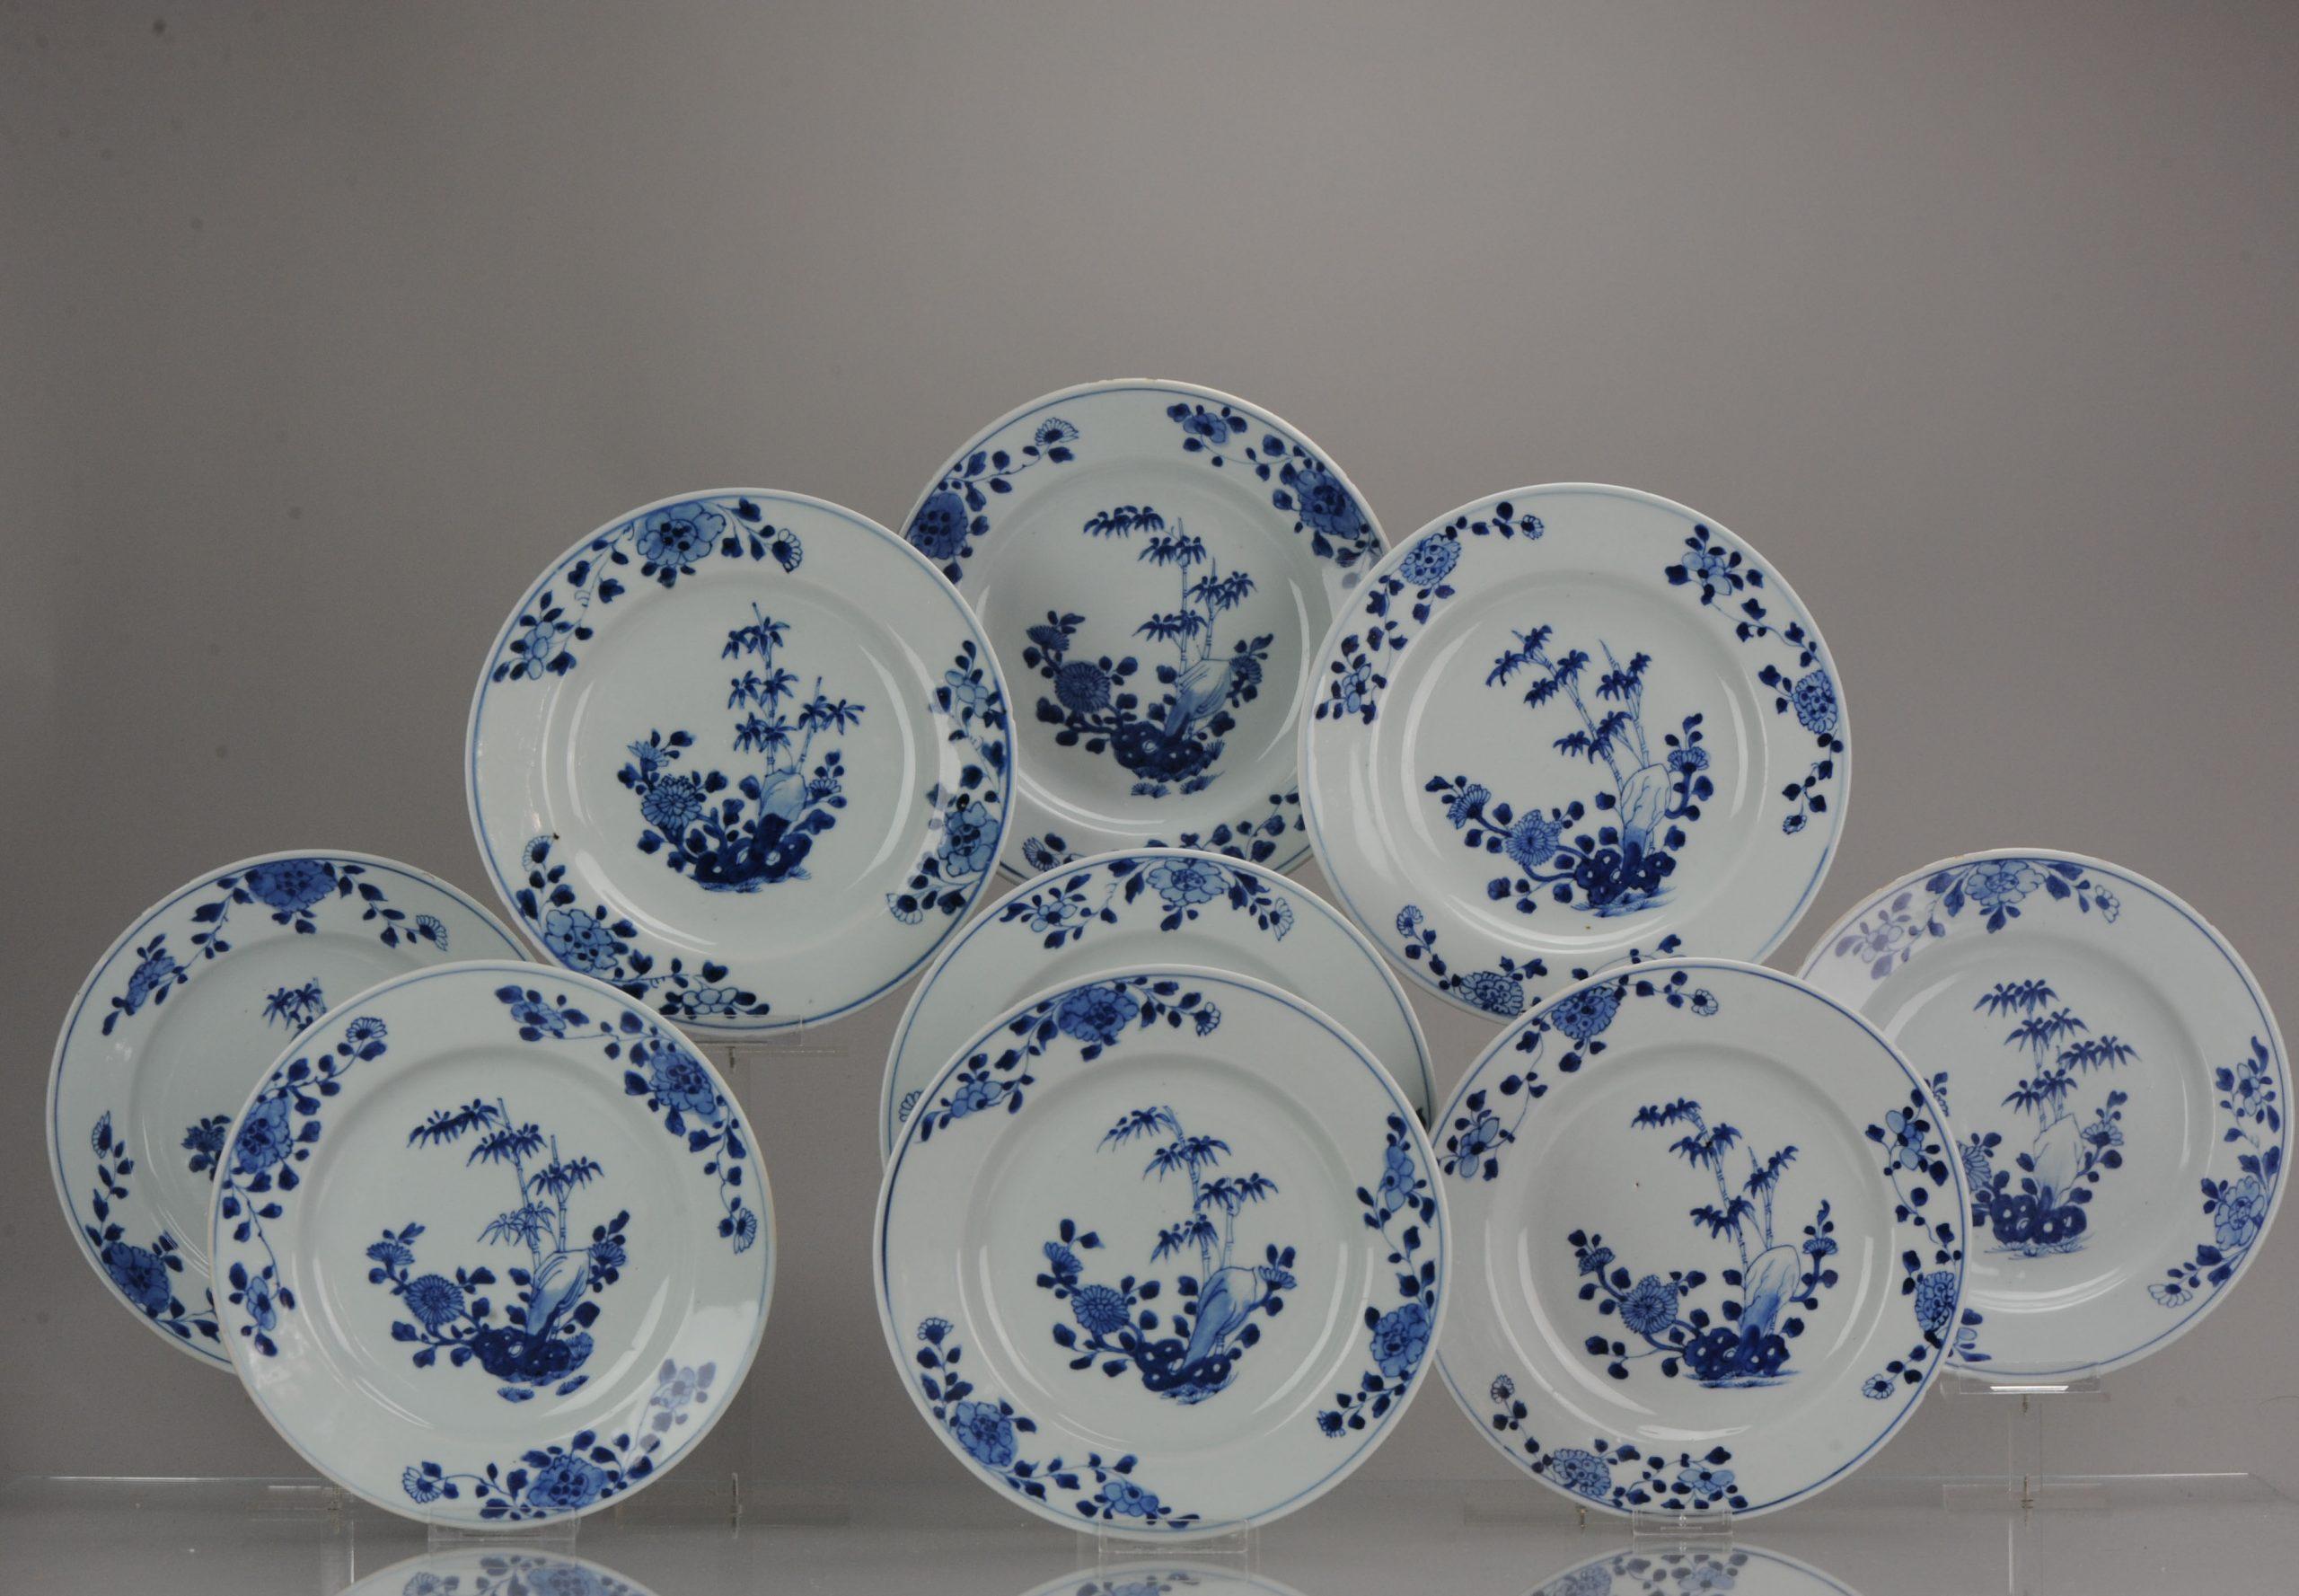 A very nicely decorated set of 5 large plates. Dating to circa 1700-1720

A scene of peony, bamboo, chrysanthemum and rocks

Peony

Peony - Mu-Dan - Queen of Flowers, the peony is a emblem of wealth and distinction.

Bamboo

Bamboo - Zhu -